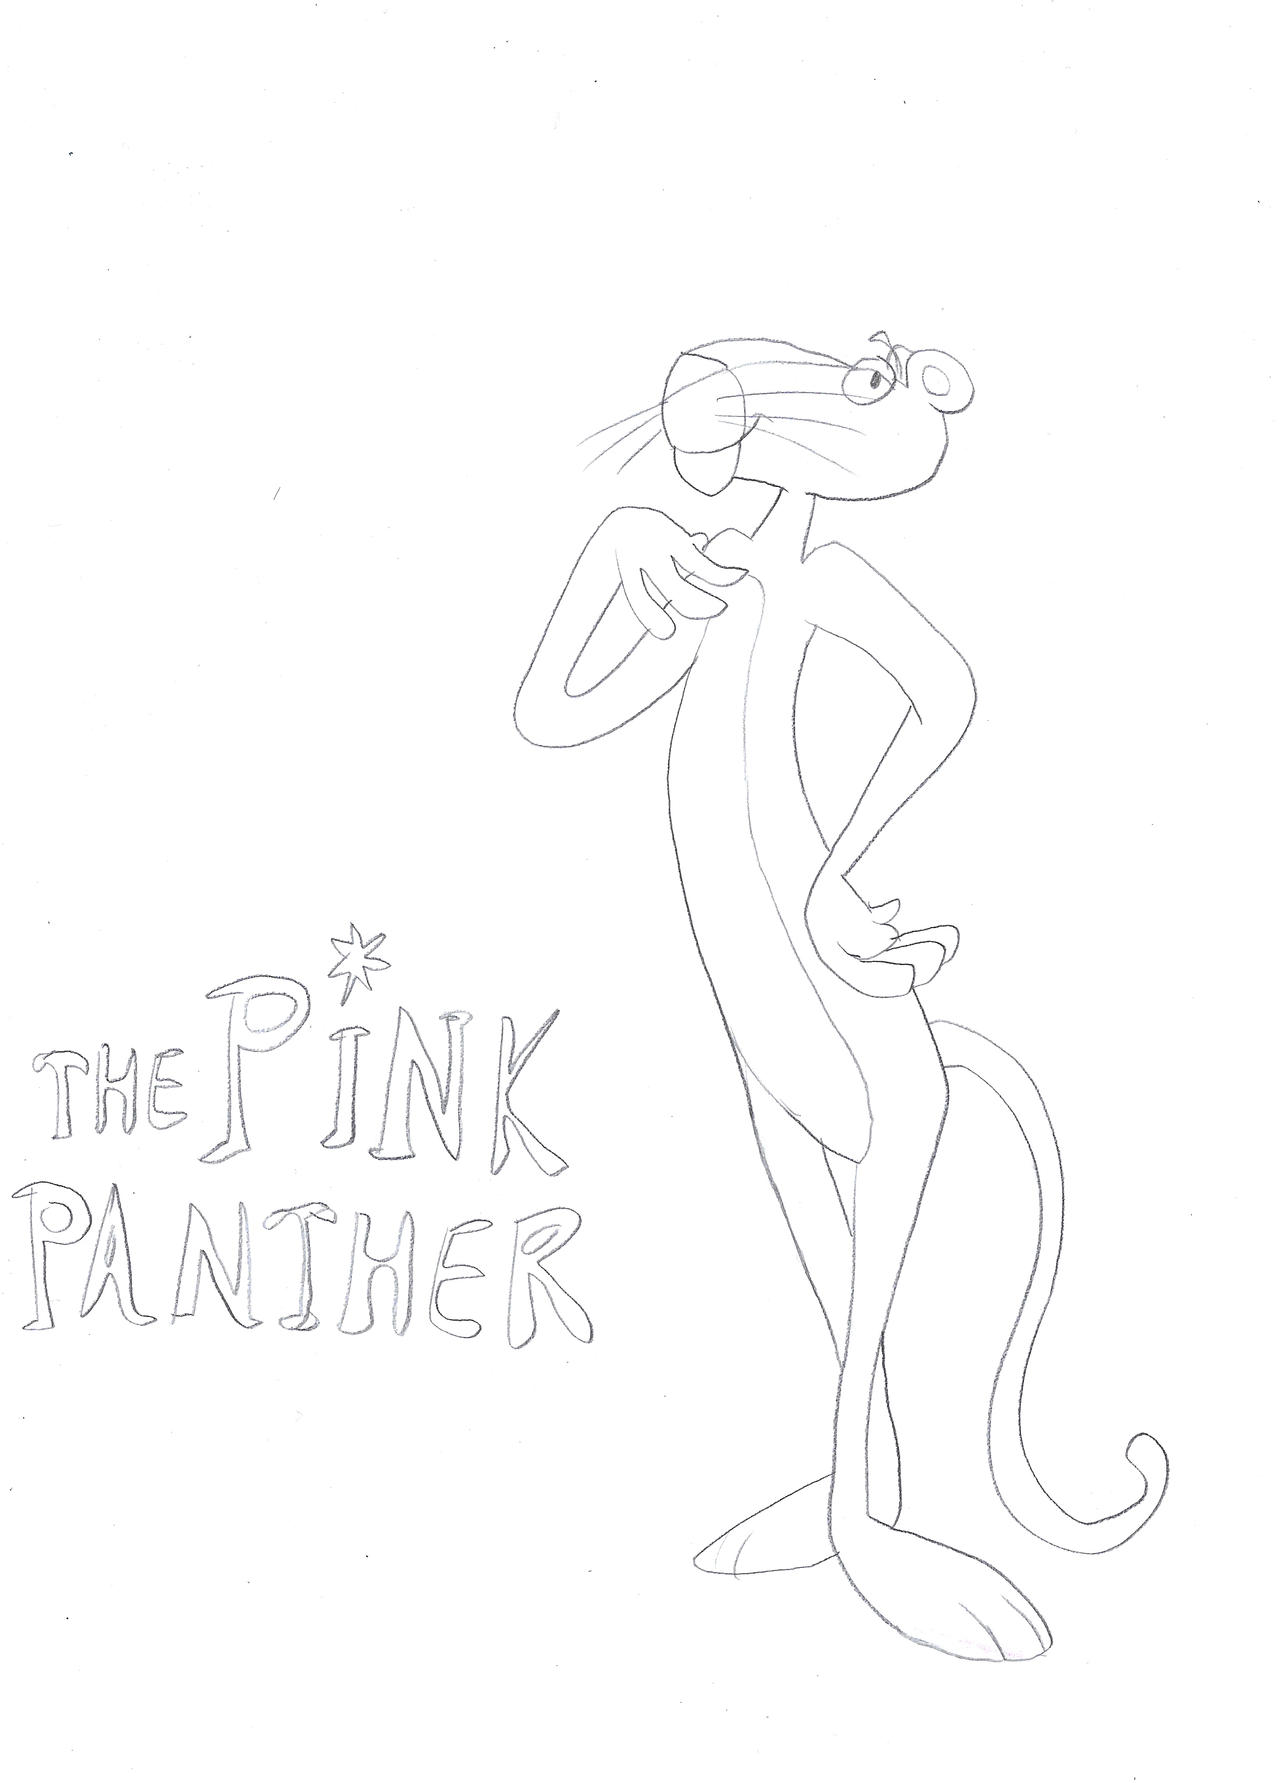 The Pink Panther by Louisetheanimator on DeviantArt